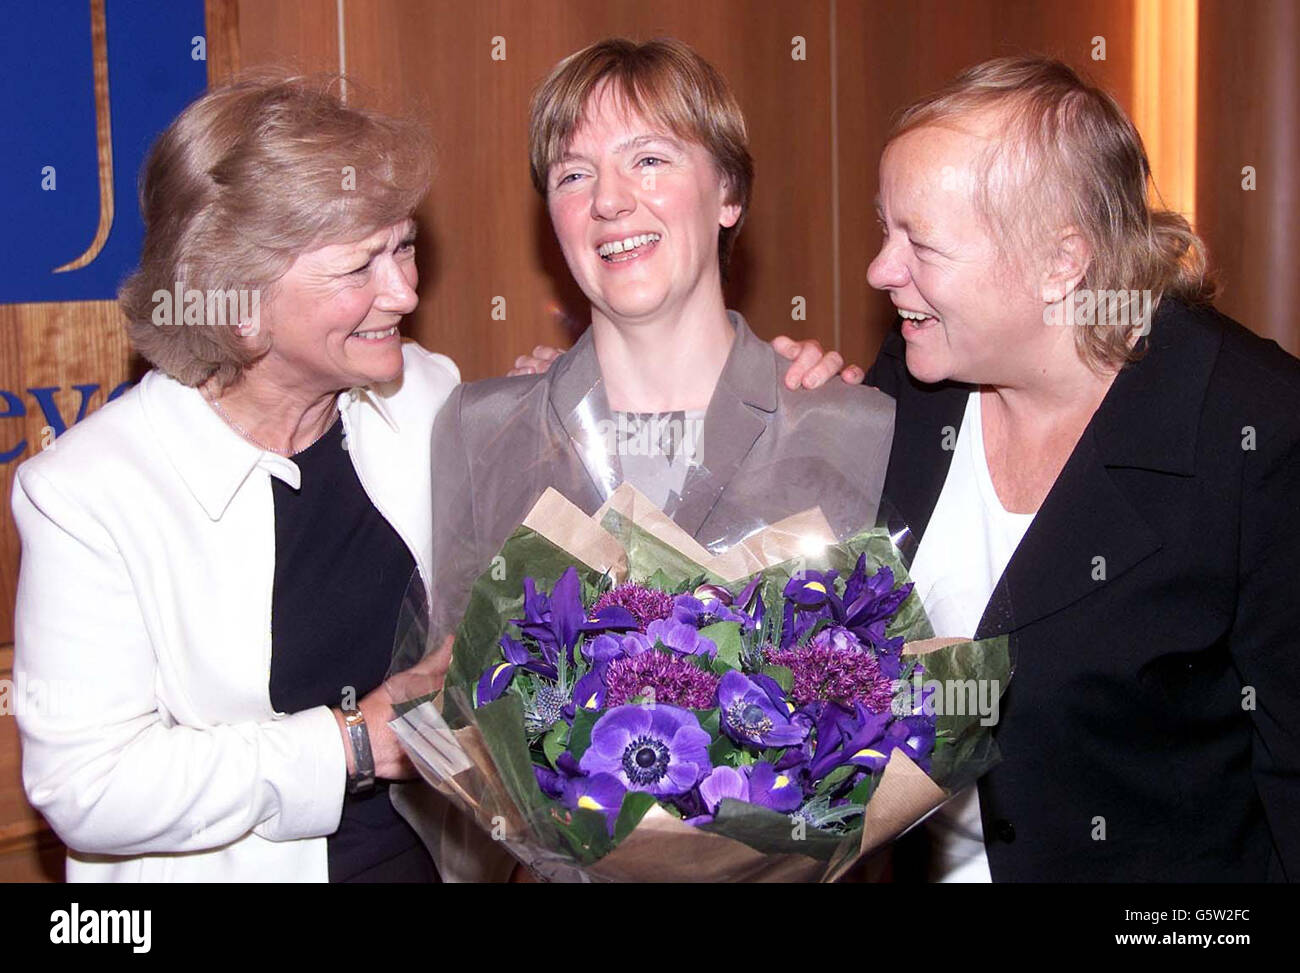 Former Labour MP and Cabinet Minister, Dr Mo Mowlam (right) at the award ceremony for Britain's European Woman of the year with the winner Linda McAvan MEP from Yorkshire at (centre) and MEP Gladys Kinnock at Unilever House, London. *...During the ceremony the former MP extolled the virtues of joining the Euro. Stock Photo